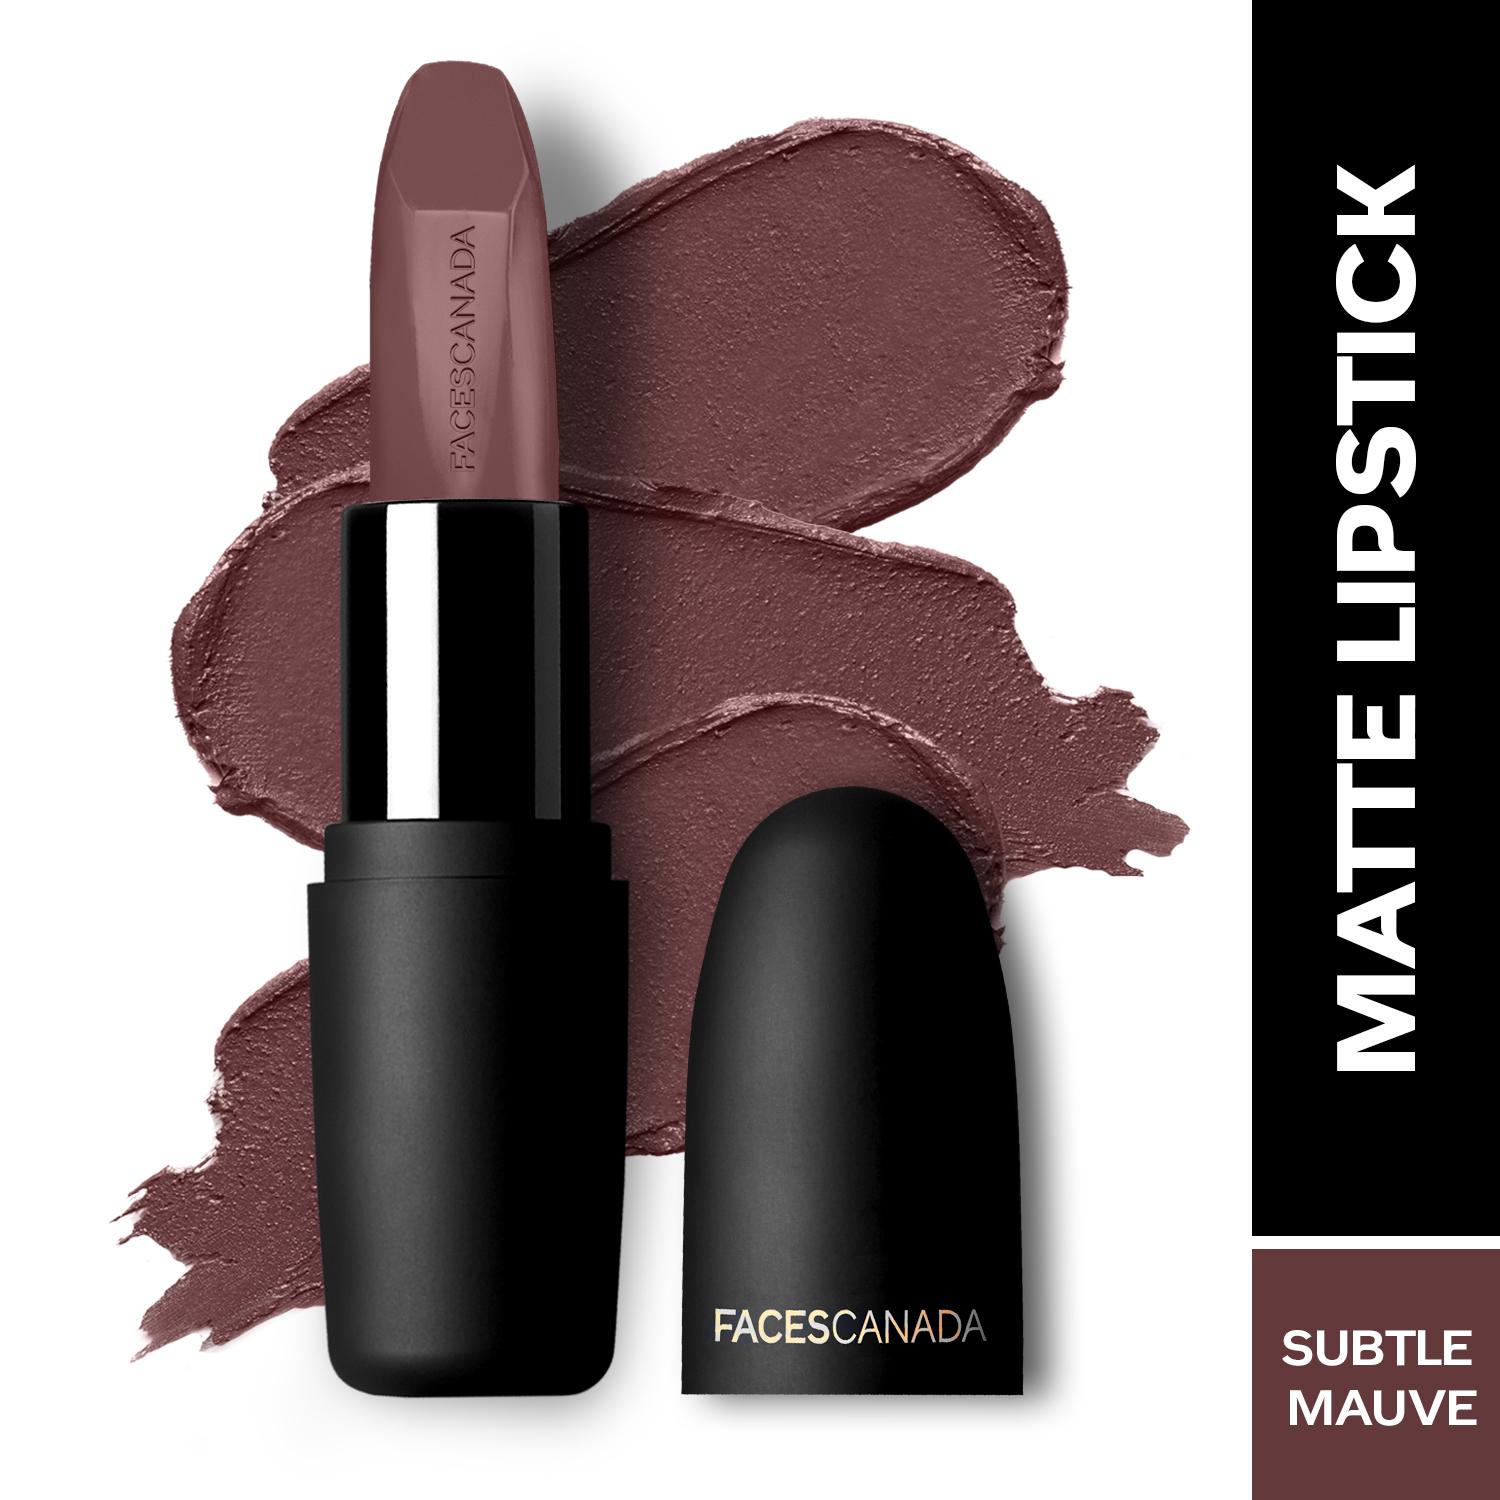 Faces Canada | Faces Canada Weightless Matte Lipstick, Pigmented and Hydrated Lips - Subtle Mauve 10 (4.5 g)